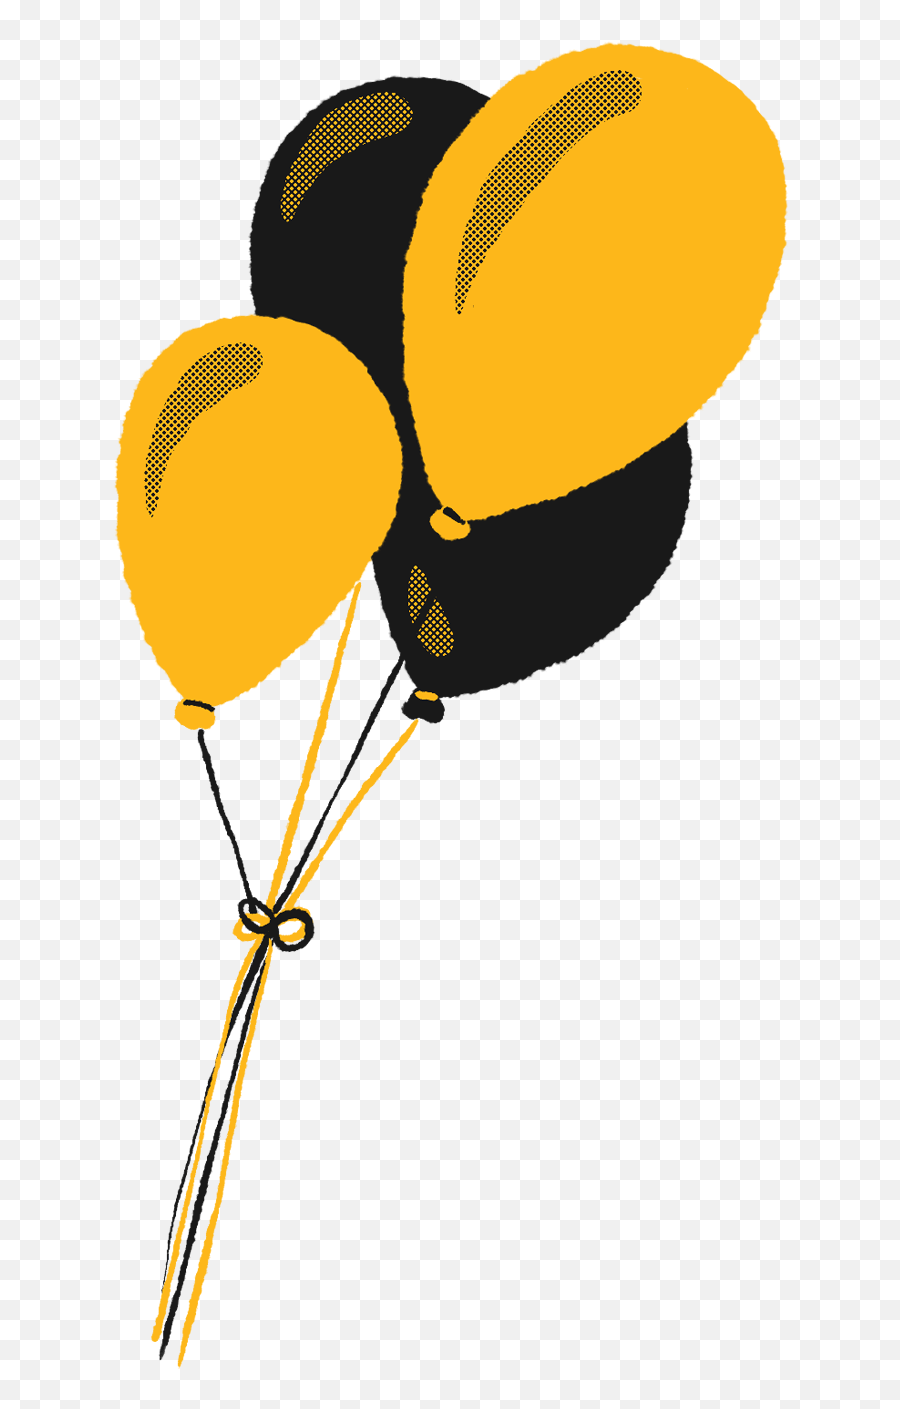 Emojis And Stickers Graduation U0026 Commencement - Balloon Png,Party Popper Emoji Png